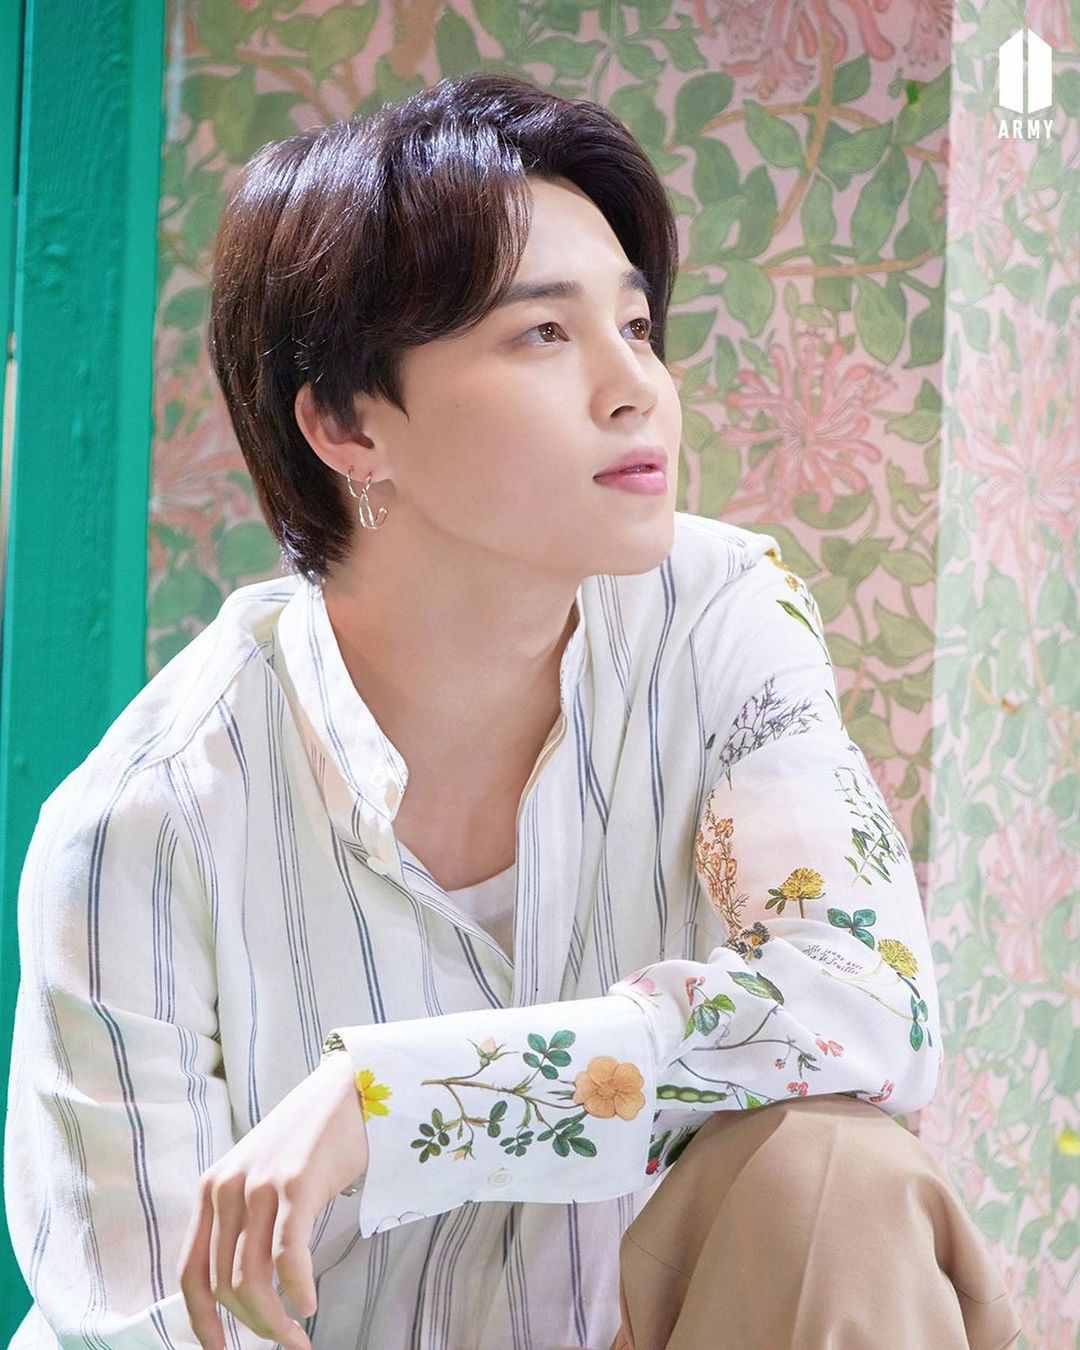 Jimin BTS - Biography, Profile, Facts, and Career